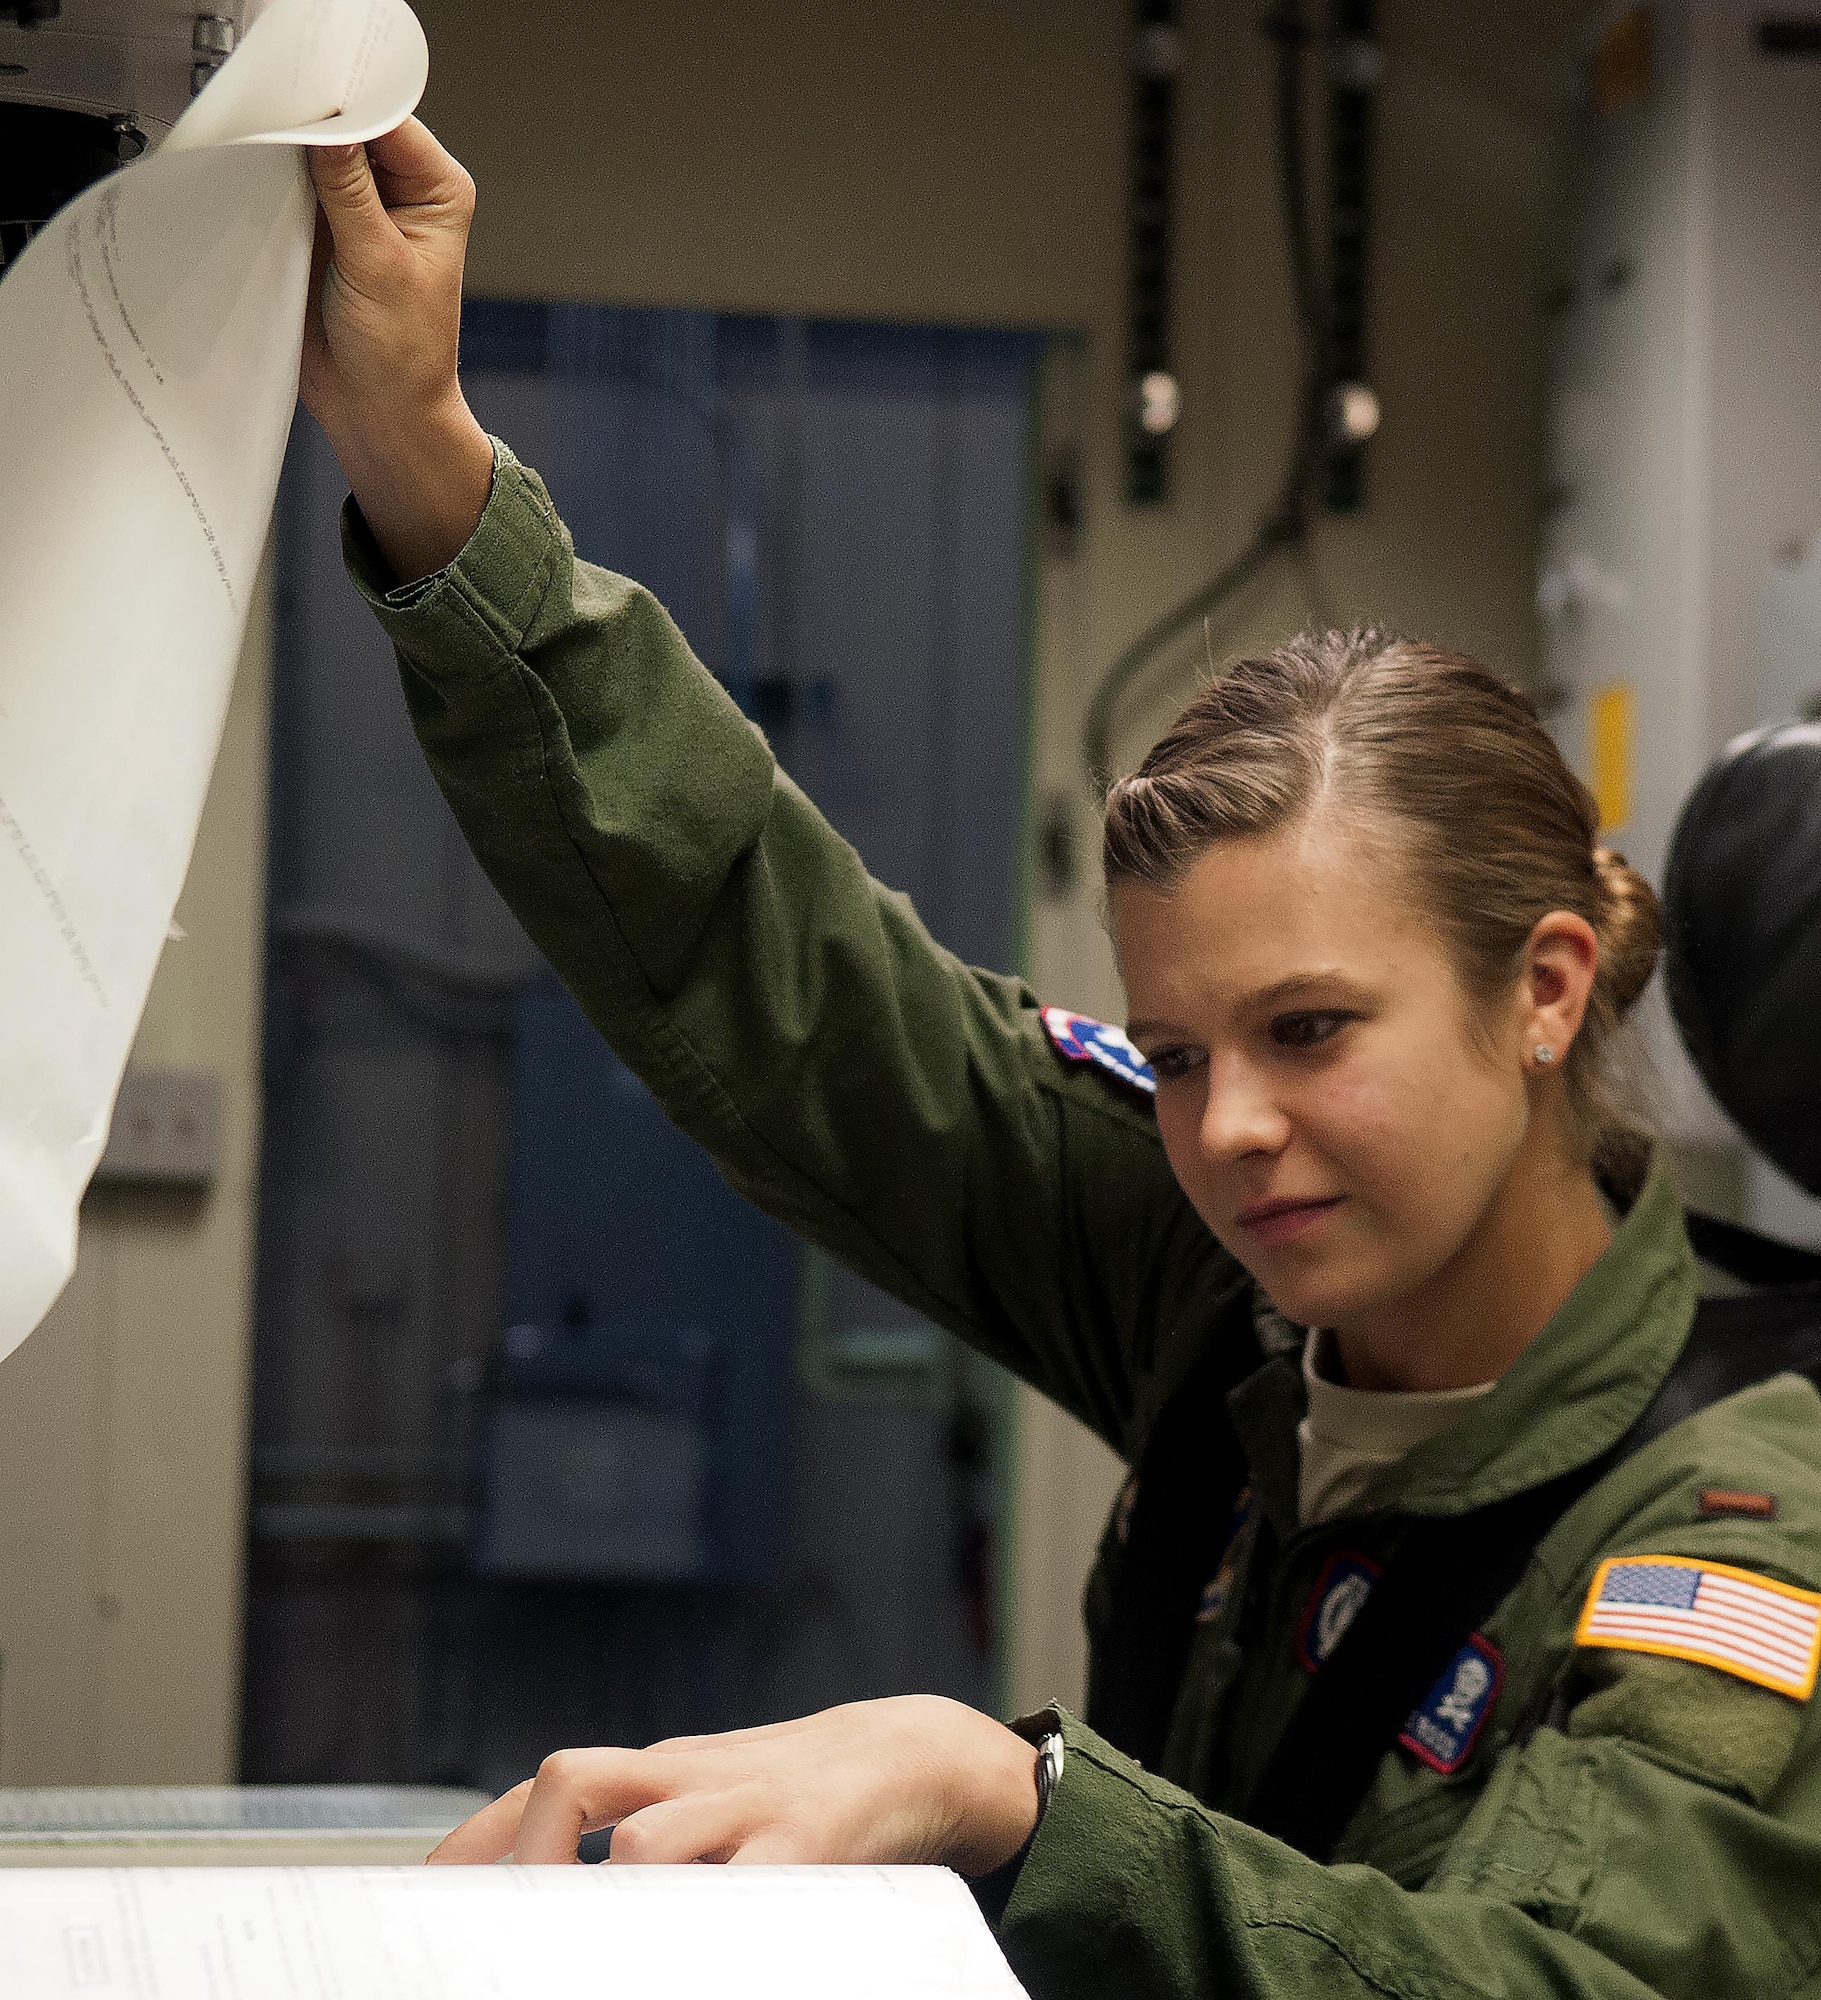 Second Lt. Madeline Ross, 319th Missile Squadron deputy combat crew commander, reads through a set of technical orders during a training exercise inside a missile procedure trainer on F.E. Warren Air Force Base, Wyo., August 13, 2015. Missileers monitor launch facilities and remain in constant communication with maintainers while working out at sites. (U.S. Air Force file photo by Airman 1st Class Brandon Valle)